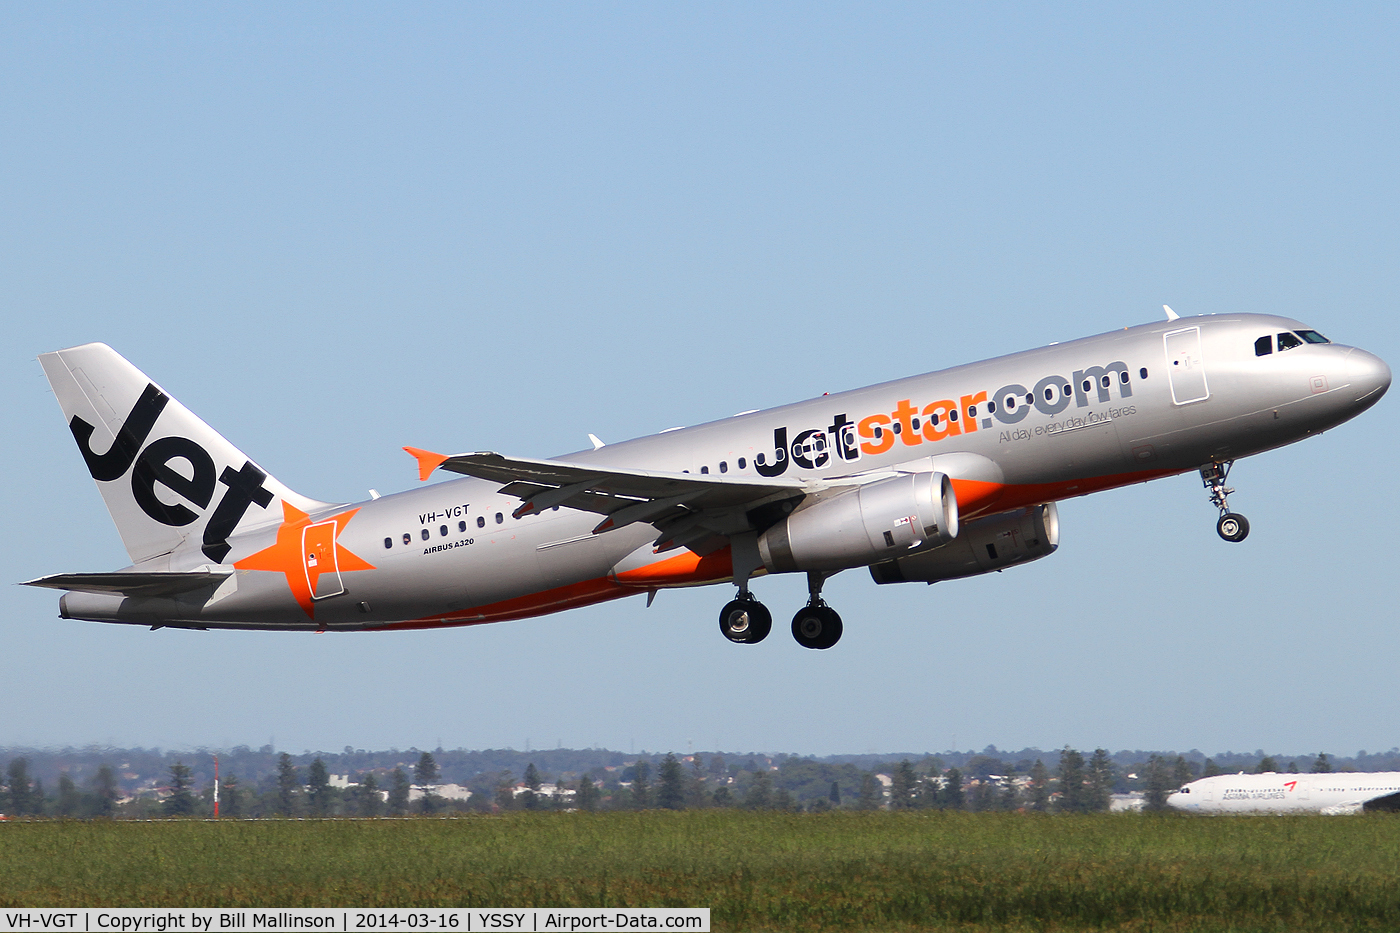 VH-VGT, 2009 Airbus A320-232 C/N 4178, away from 34R